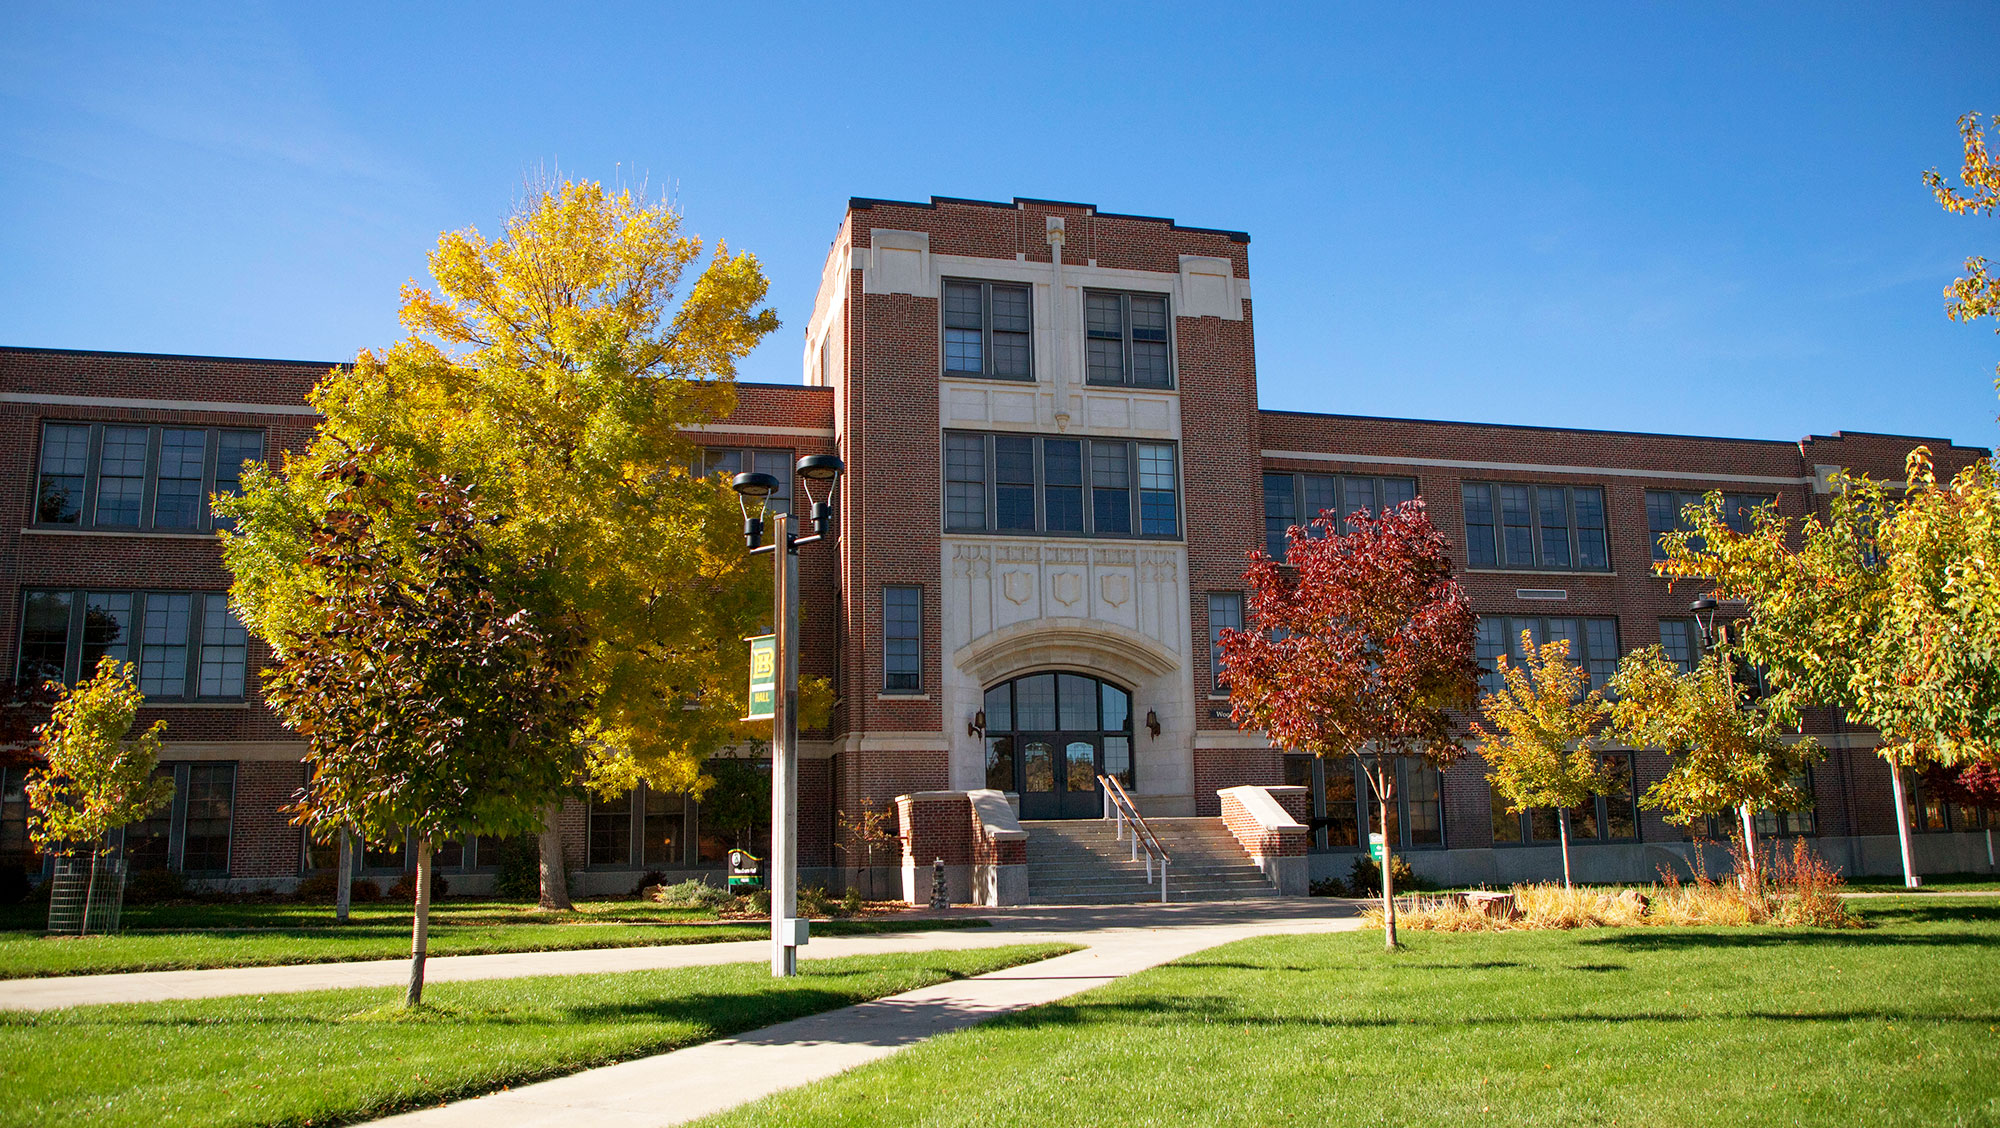 Image of Woodburn Hall on the BHSU campus--a brick building with fall foliage